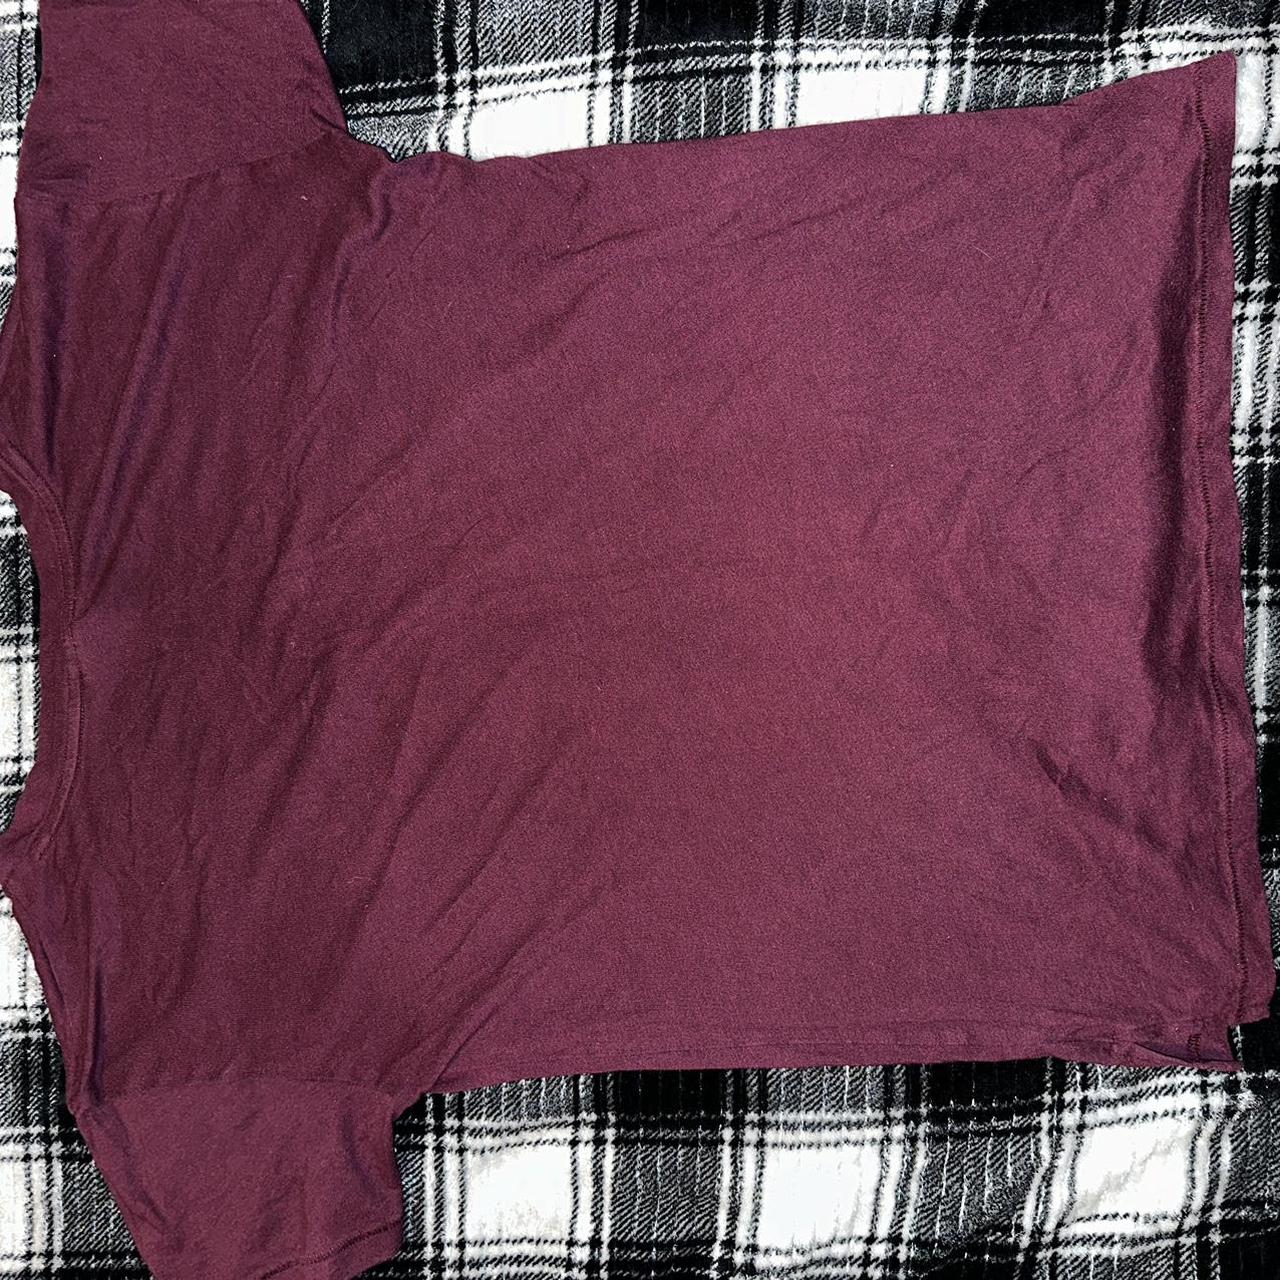 Victoria's Secret Women's Burgundy and Red T-shirt (5)